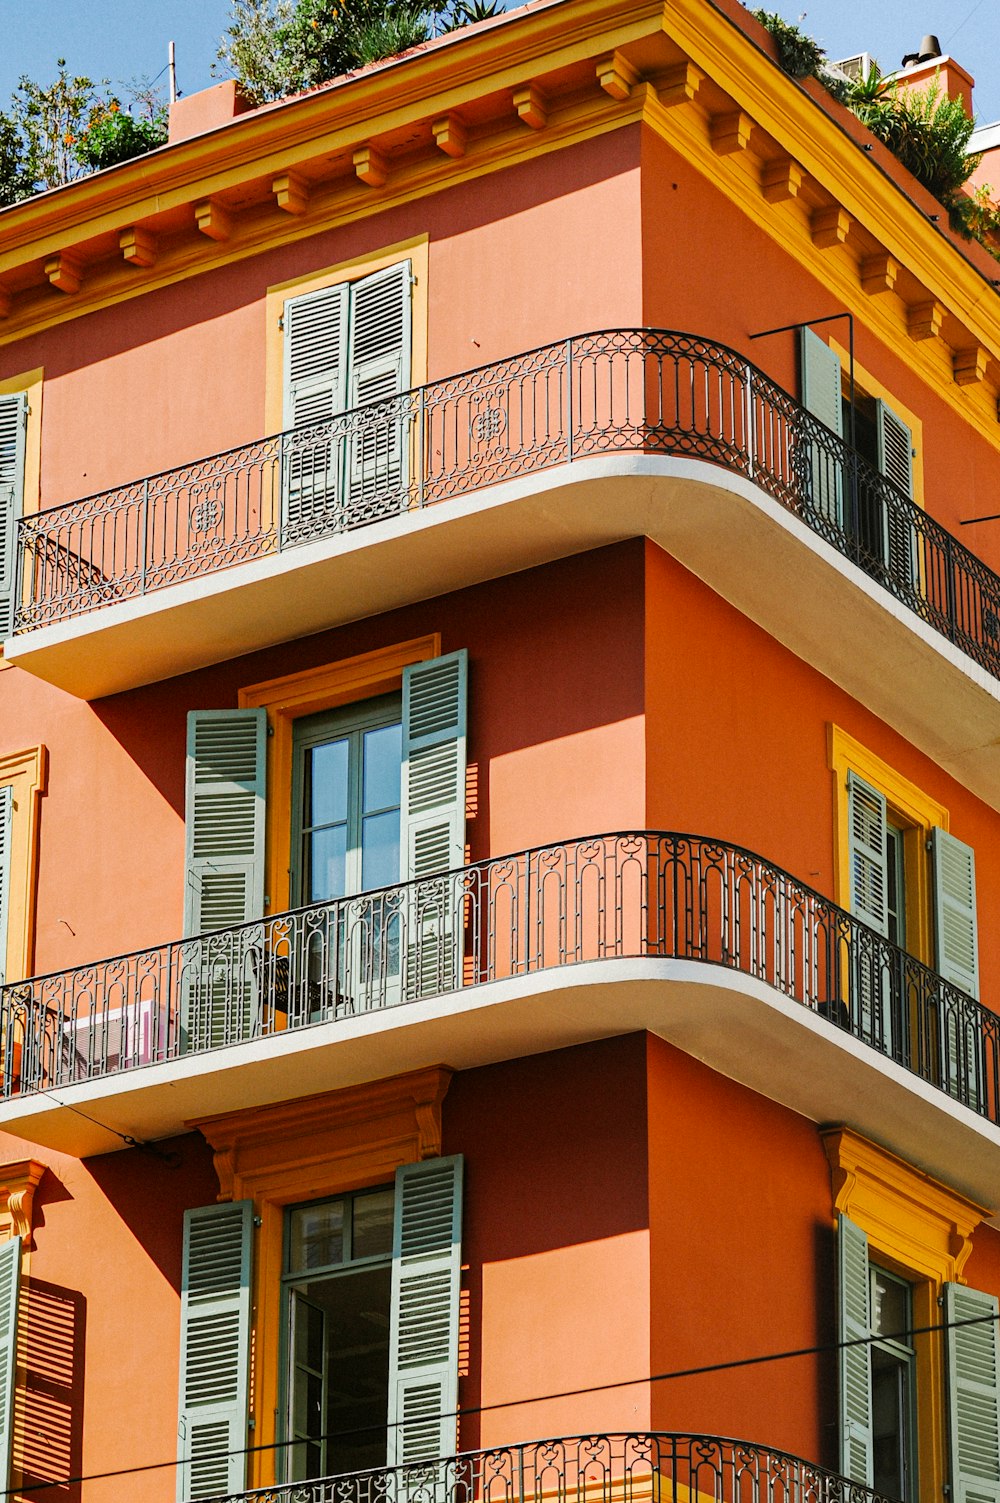 an orange building with balconies and balconies on the balconies